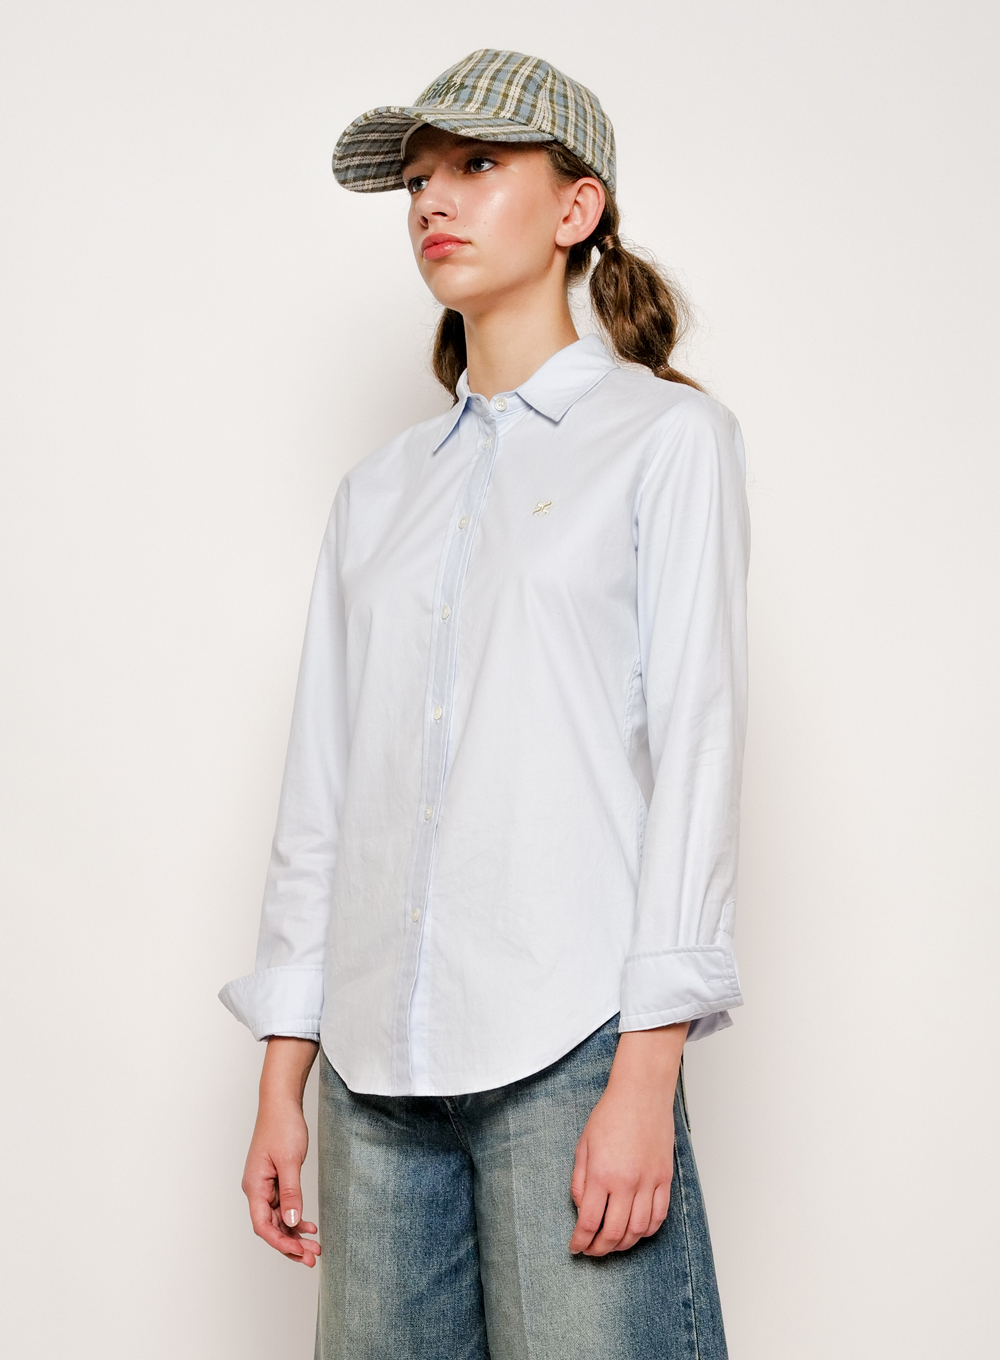 Weekday Classic Fit Cotton Shirts - Light Blue